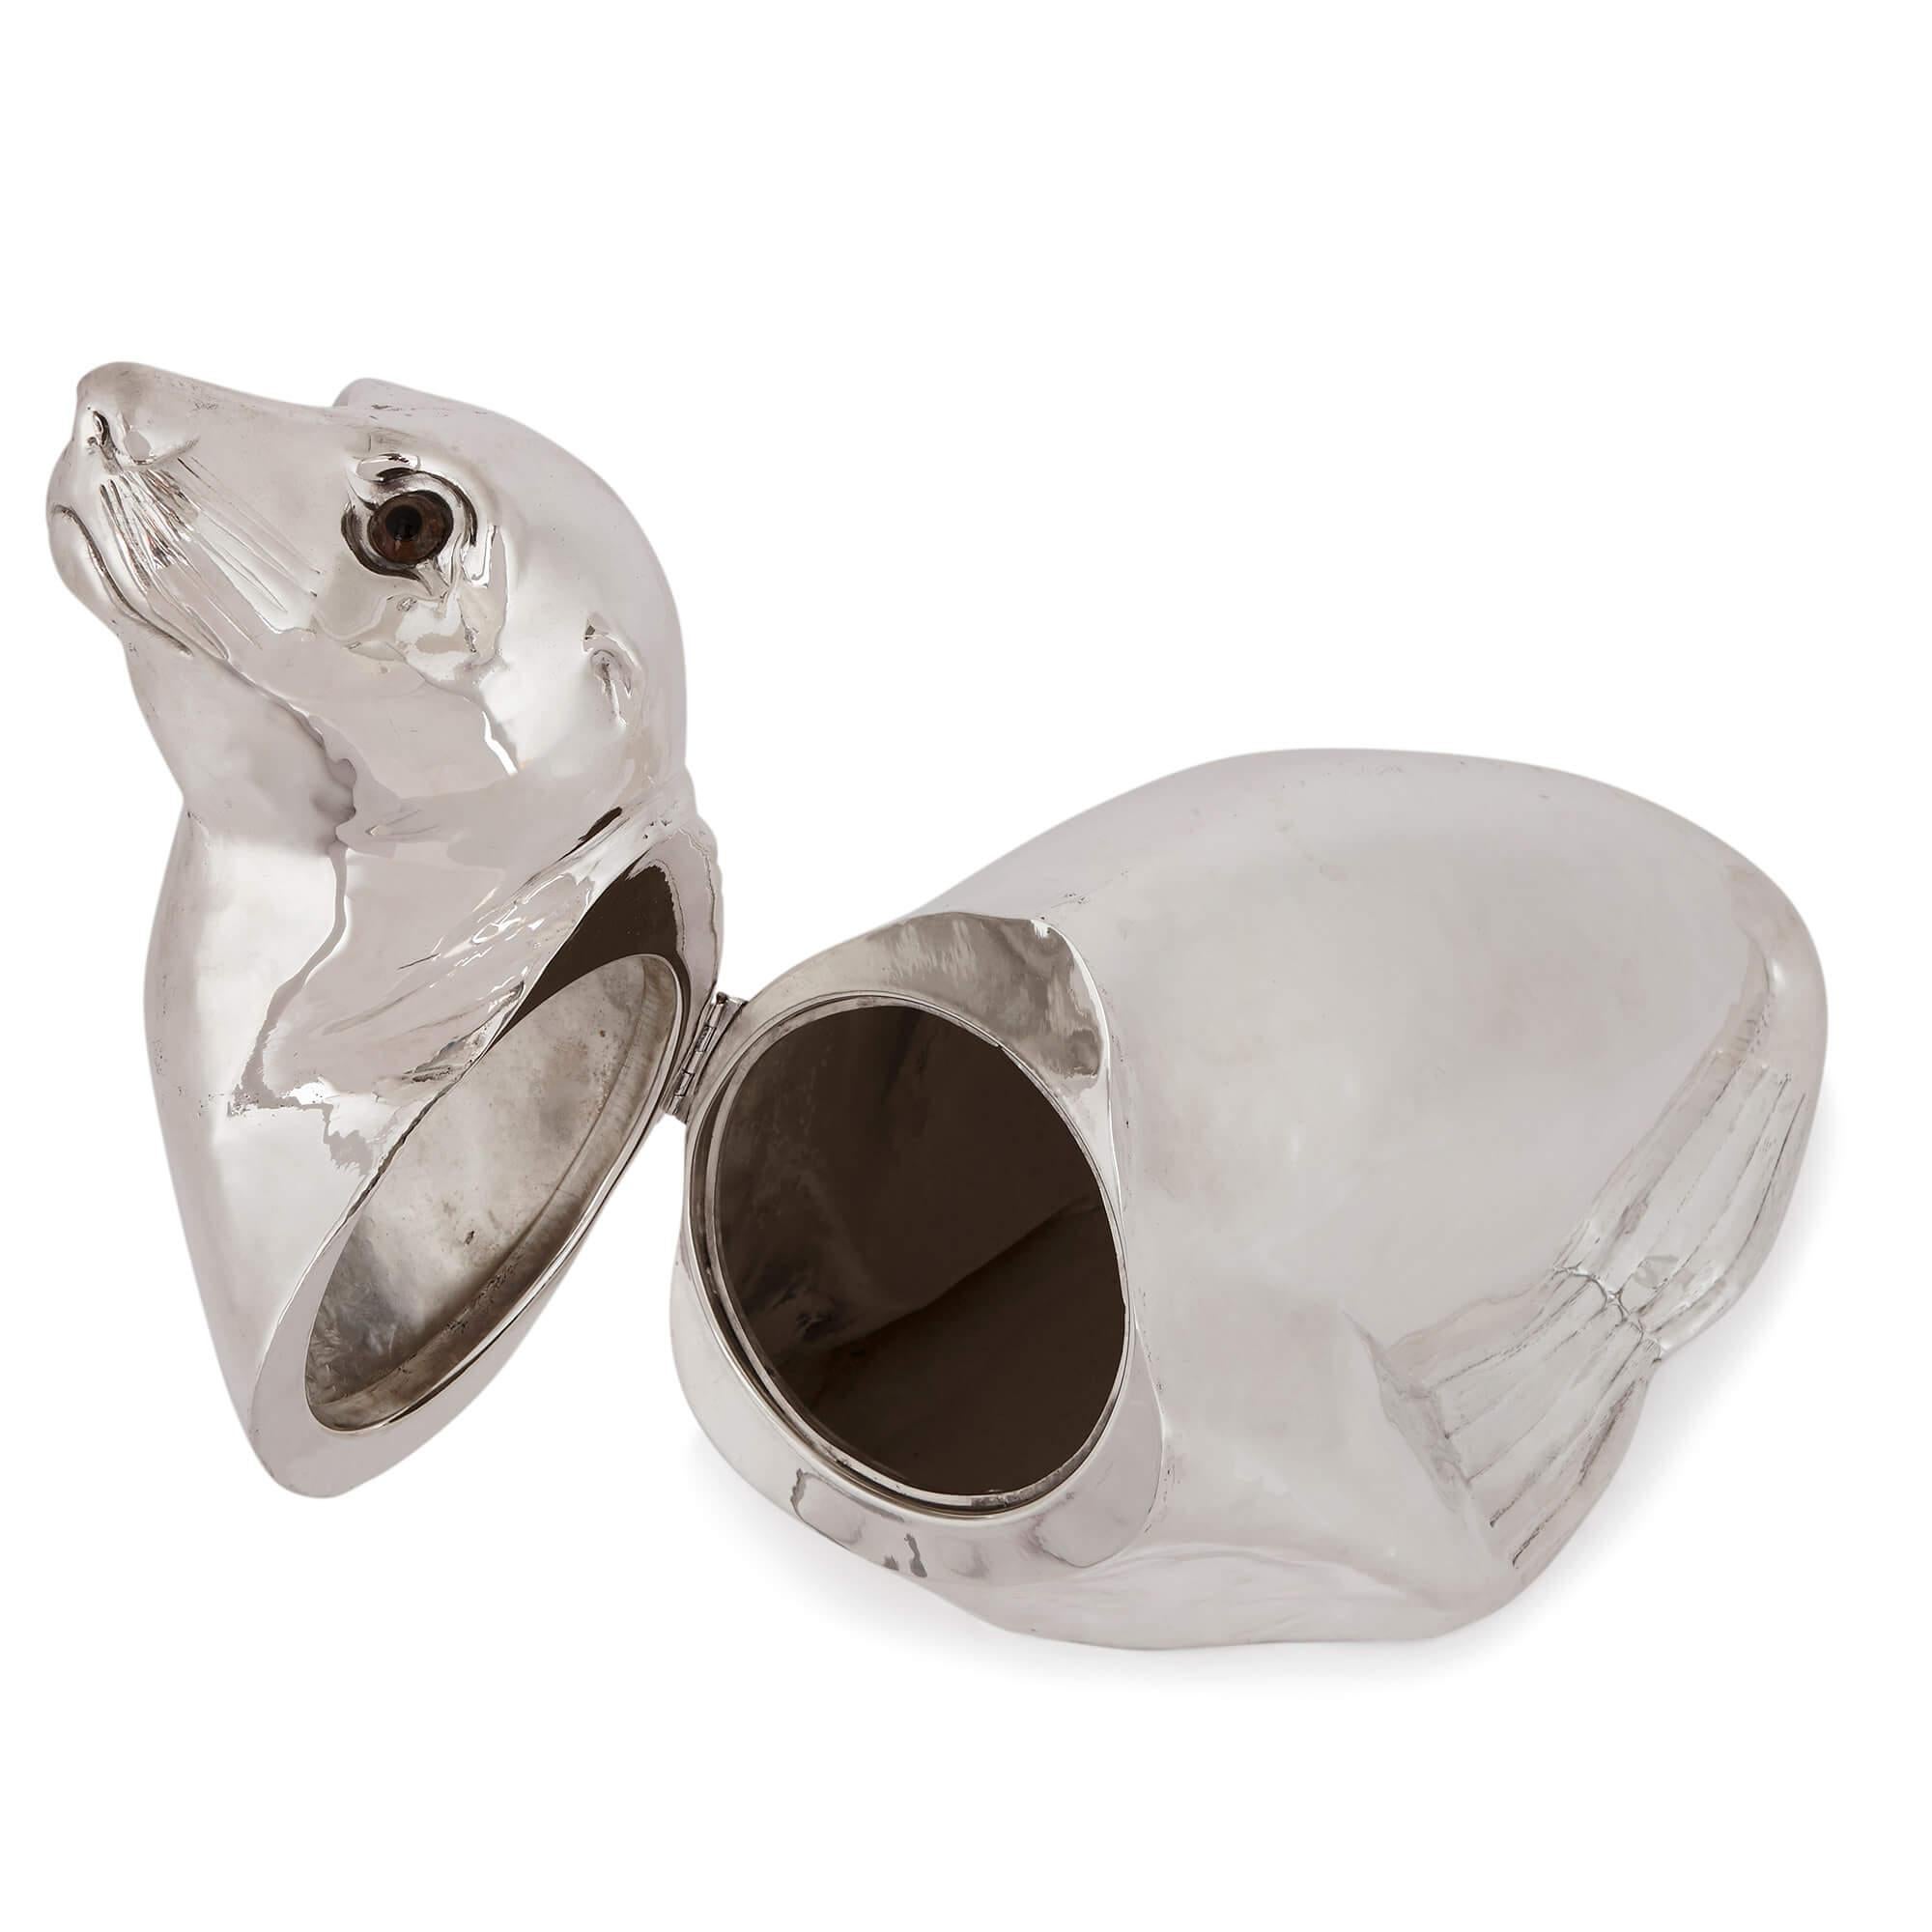 This stylish modern wine cooler is a charming piece of luxury barware, carefully sculpted in the form of a sea lion and finished in silver. The sea lion is modelled in a sitting pose, with its head pointed slightly up. Its eyes are finished in